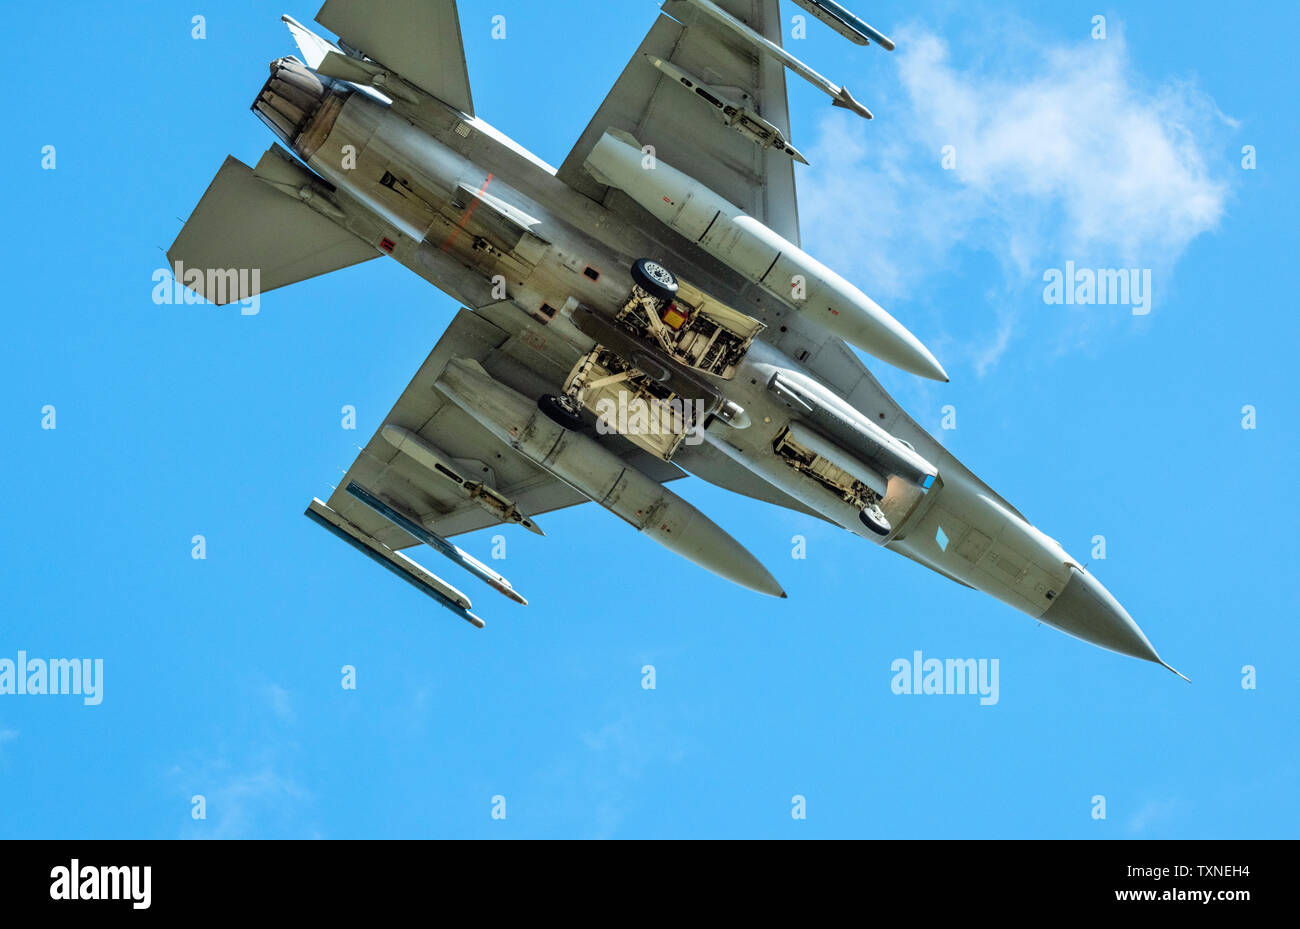 Dutch F-16 fighter plane taking part in NATO exercise Frysian flag, low angle against blue sky, Netherlands Stock Photo